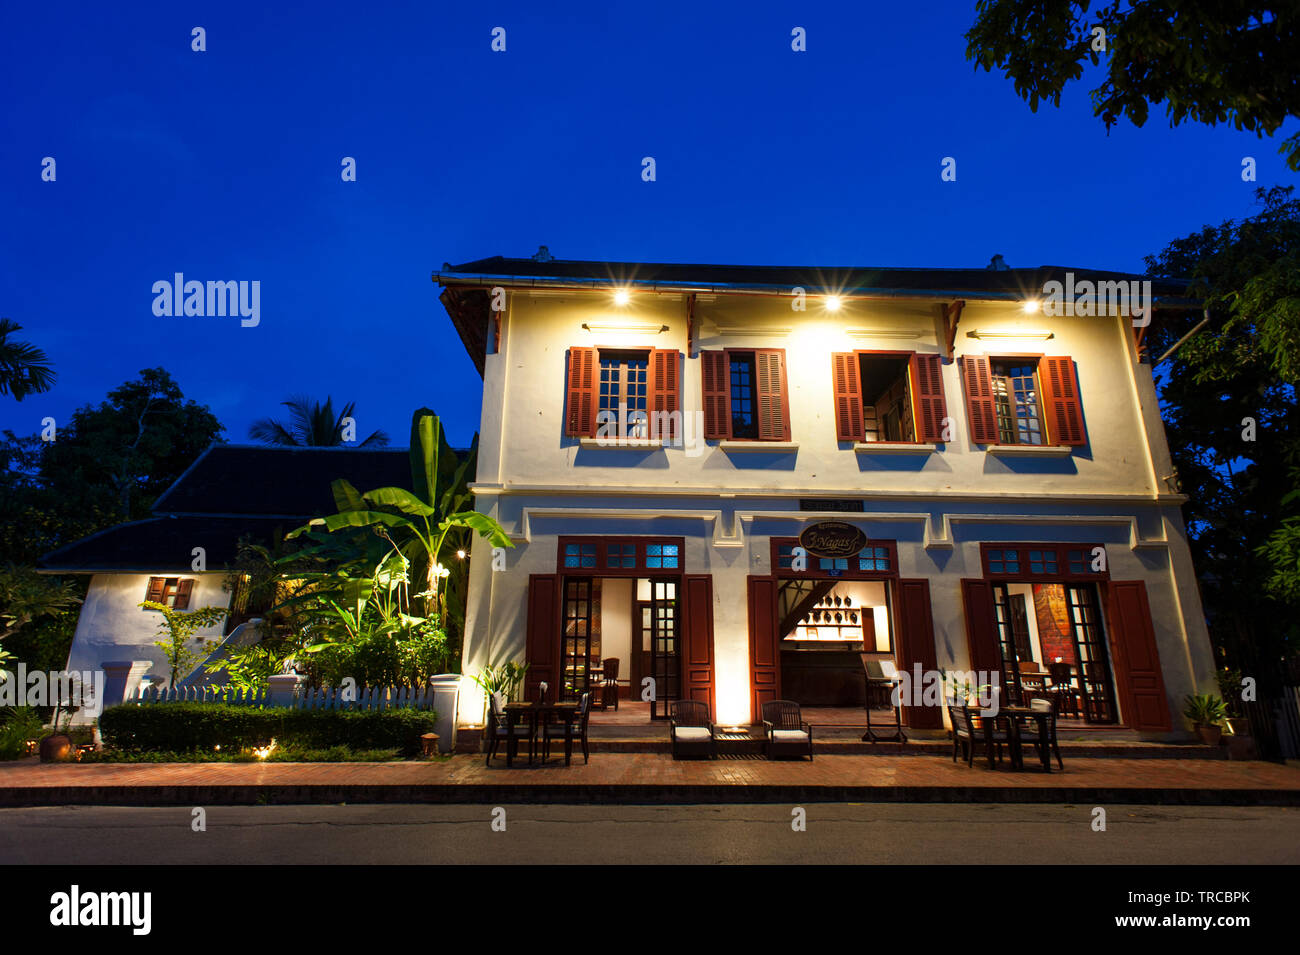 Exterior of the 3 Nagas Restaurant in Luang Prabang, a town with World Heritage status for its colonial era architecture, in the Lao PDR. Stock Photo